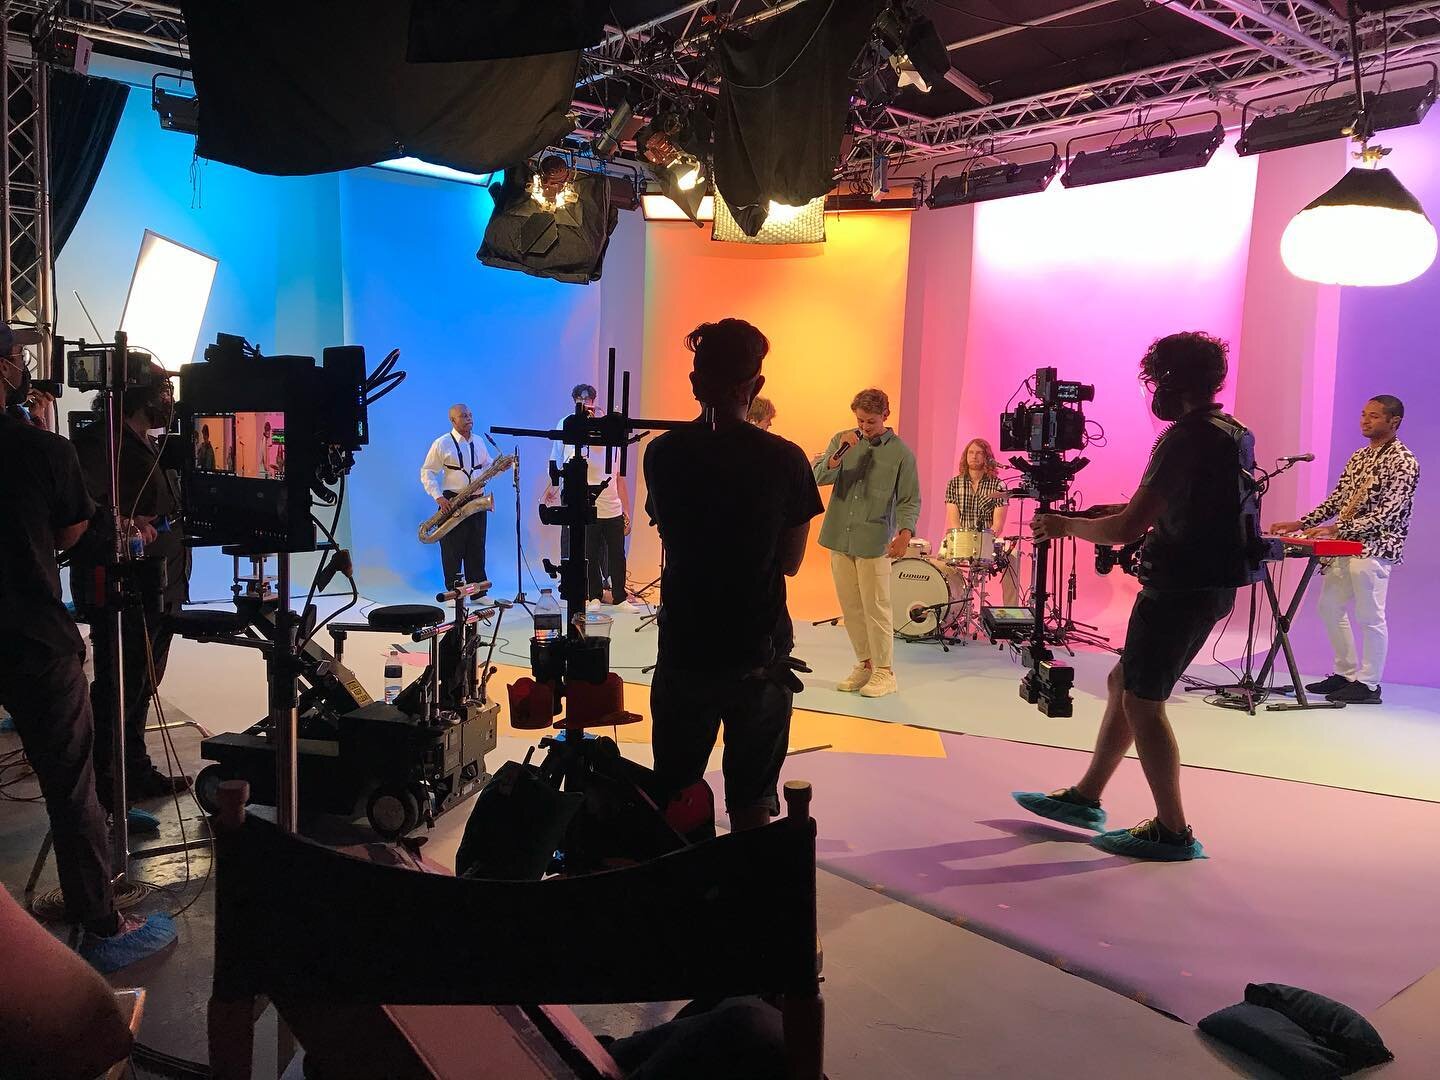 Throw back to this fun and colorful set where we shot @surfacesmusic for Fallon Tonight!
Directed by @jasonllester 
Steadicam @steadideer 

Produced by @oursecrethandshake 

Director of Photogrophy @fidel.ruizhealy 
1st AC @nico_de_gallo1 
Gaffed by 